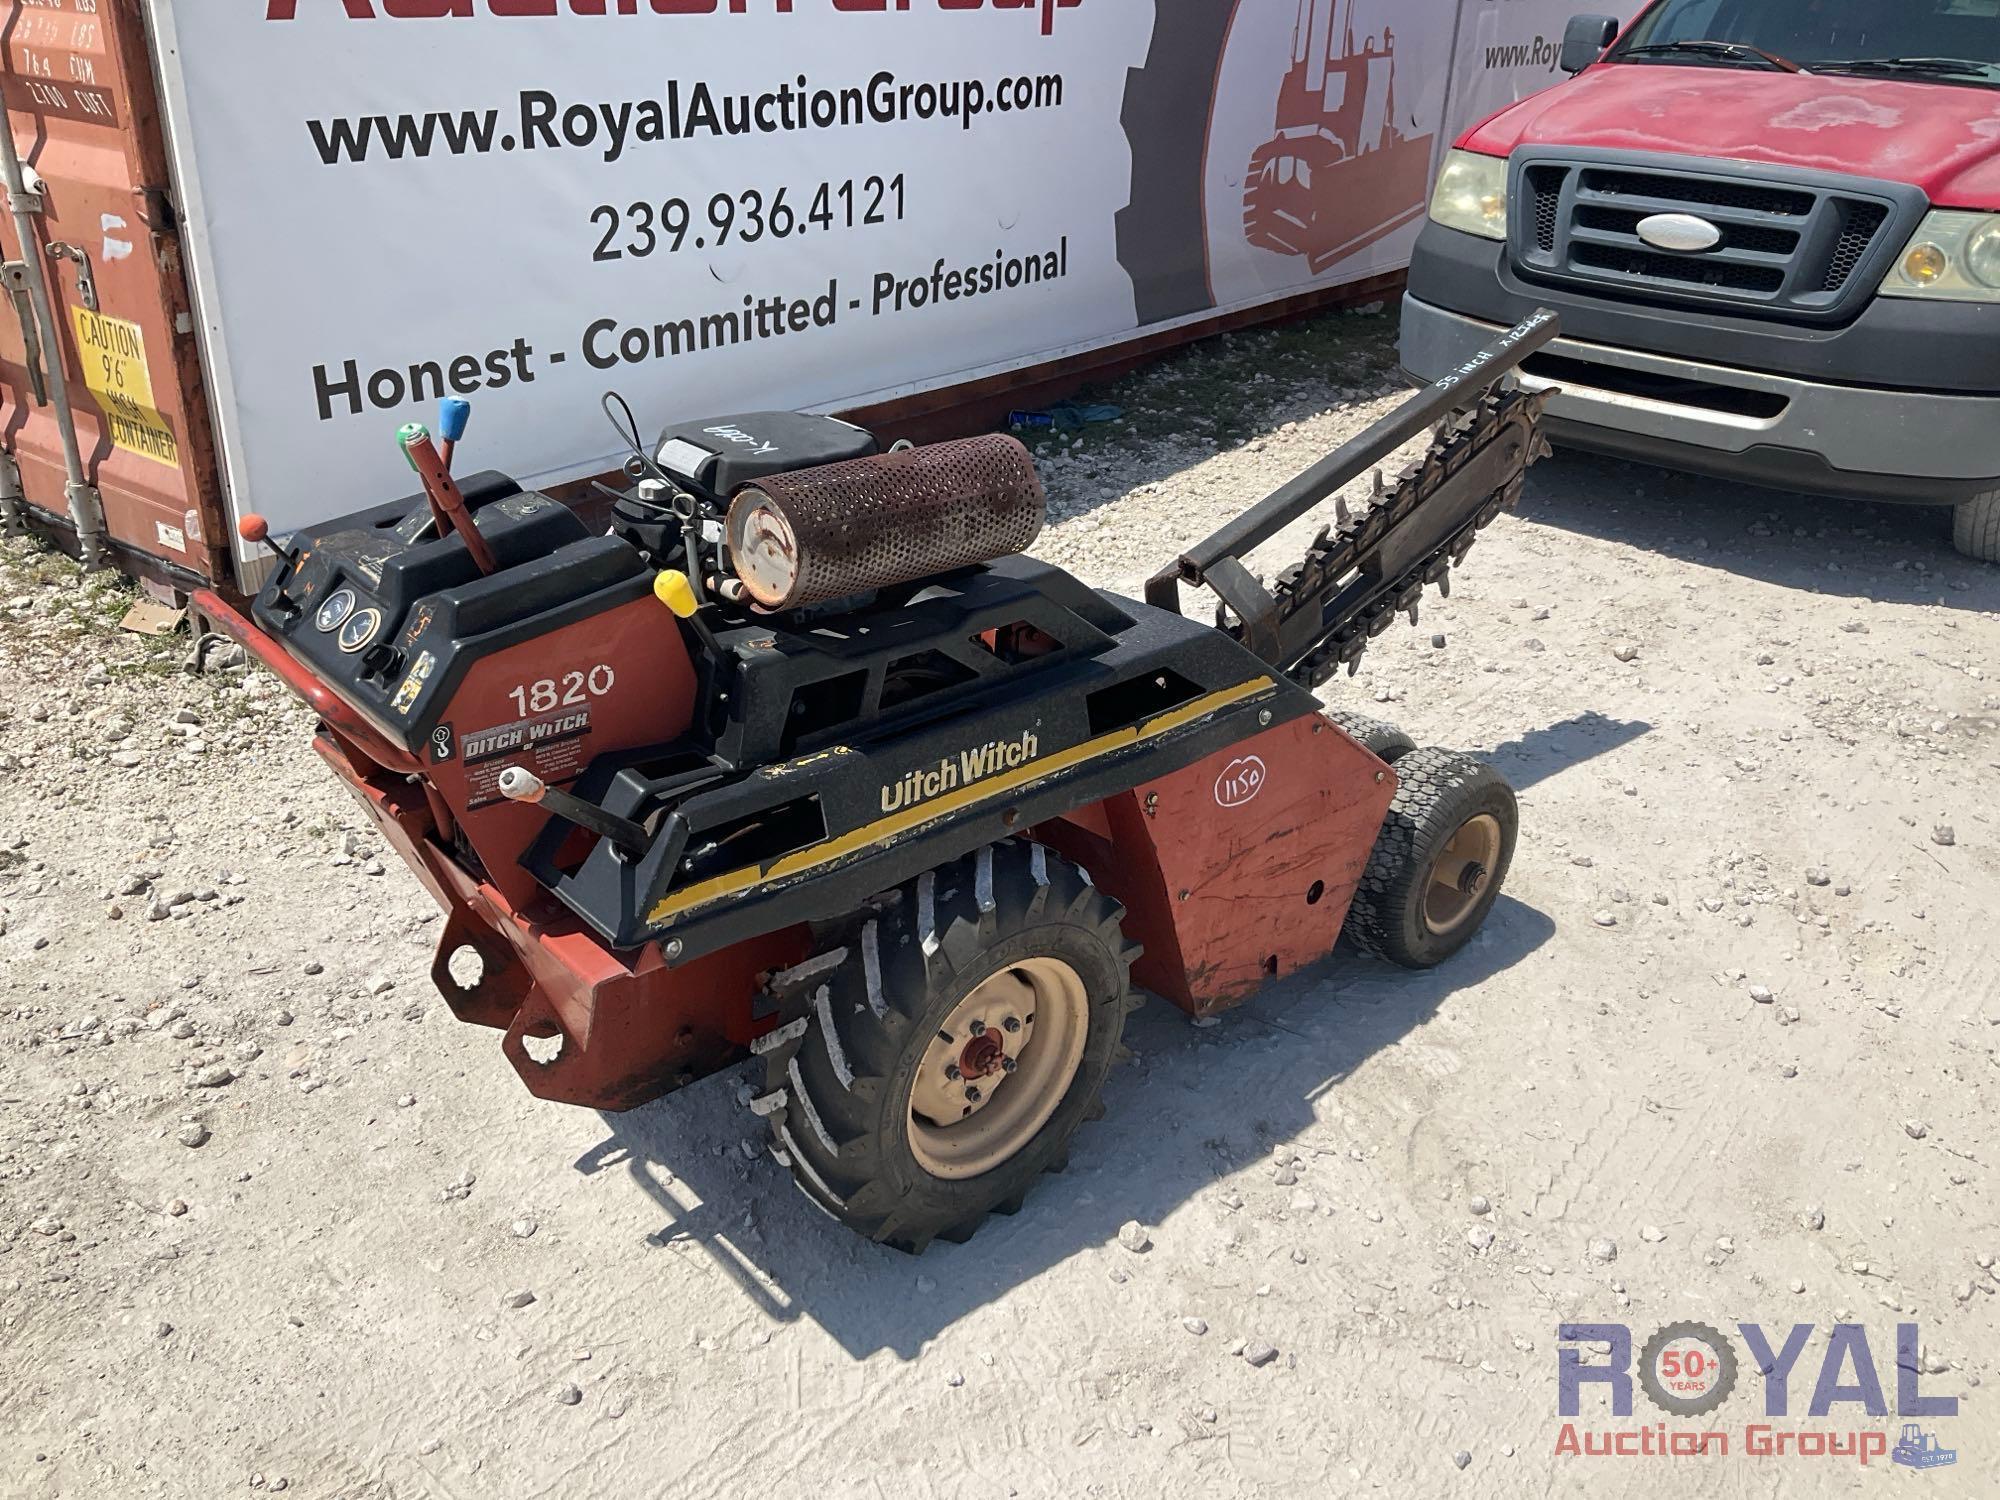 2005 Ditch Witch 1820 Walk Behind Trencher